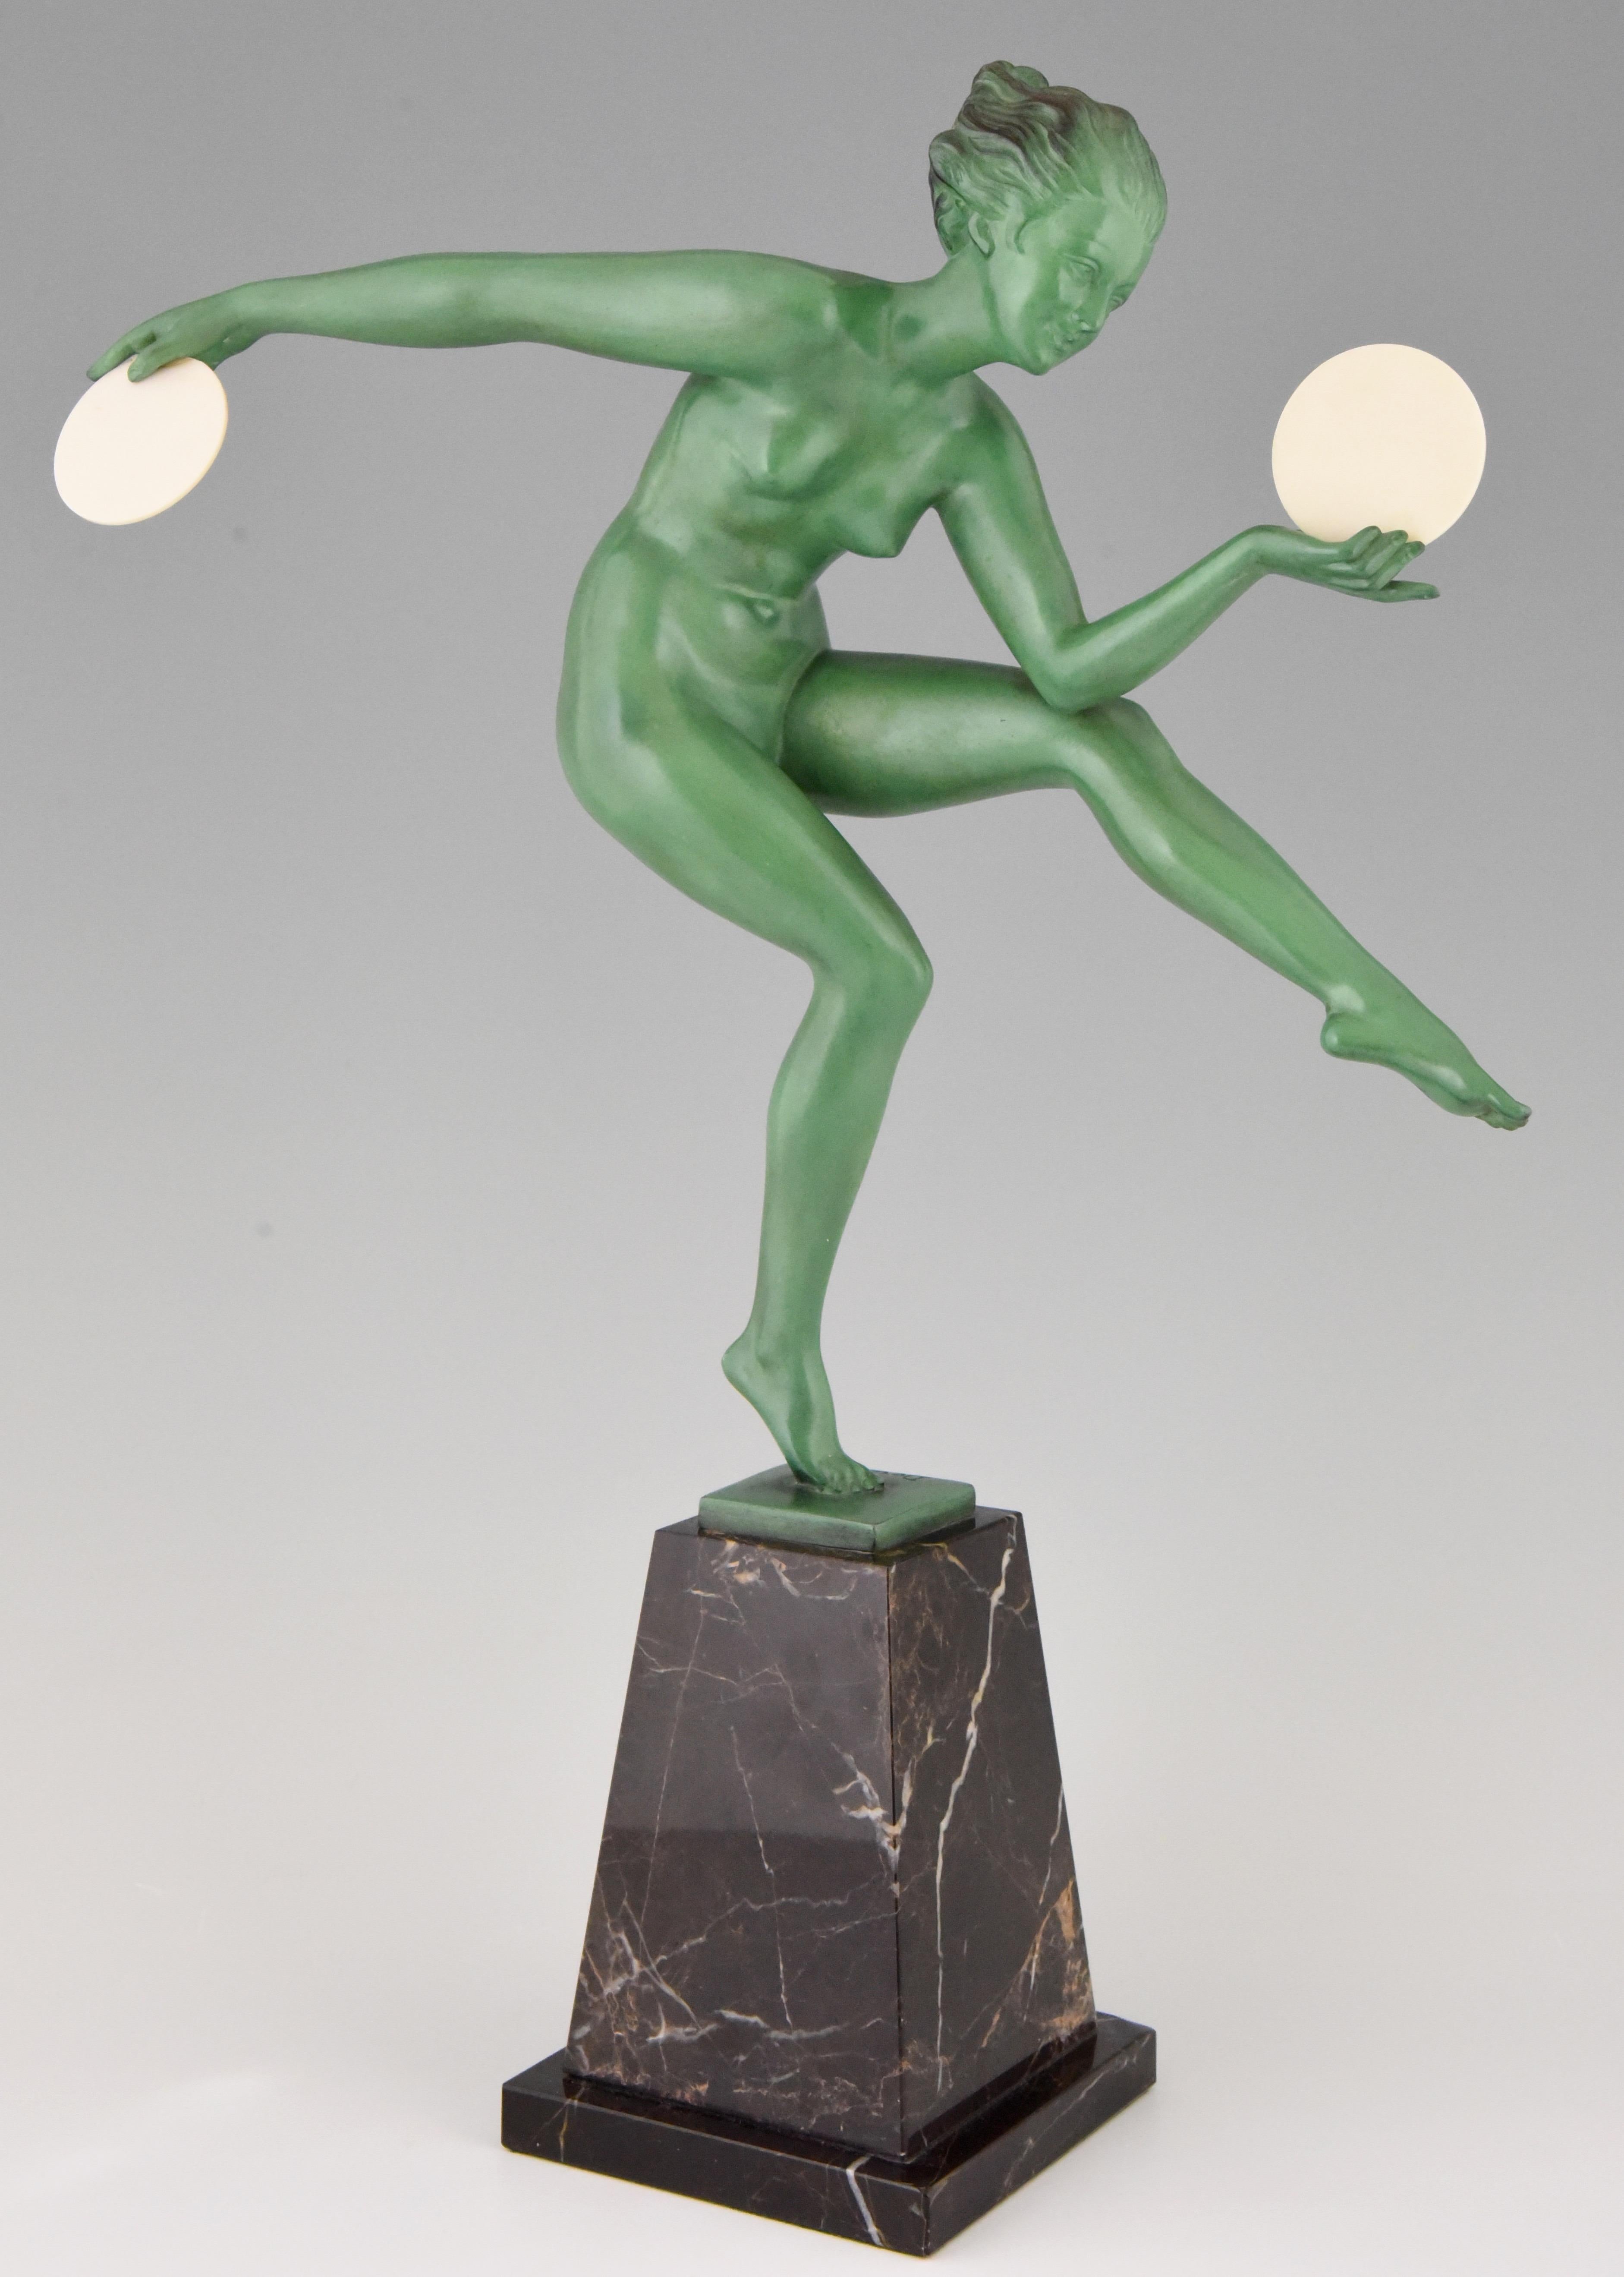 Impressive Art Deco sculpture of a nude dancer with discs, 19.5 inch tall by Derenne. Pseudonym used by Marcel Bouraine for his art metal sculptures cast by the Max Le Verrier foundry. Lovely original green patina, mounted on a marble base, France,